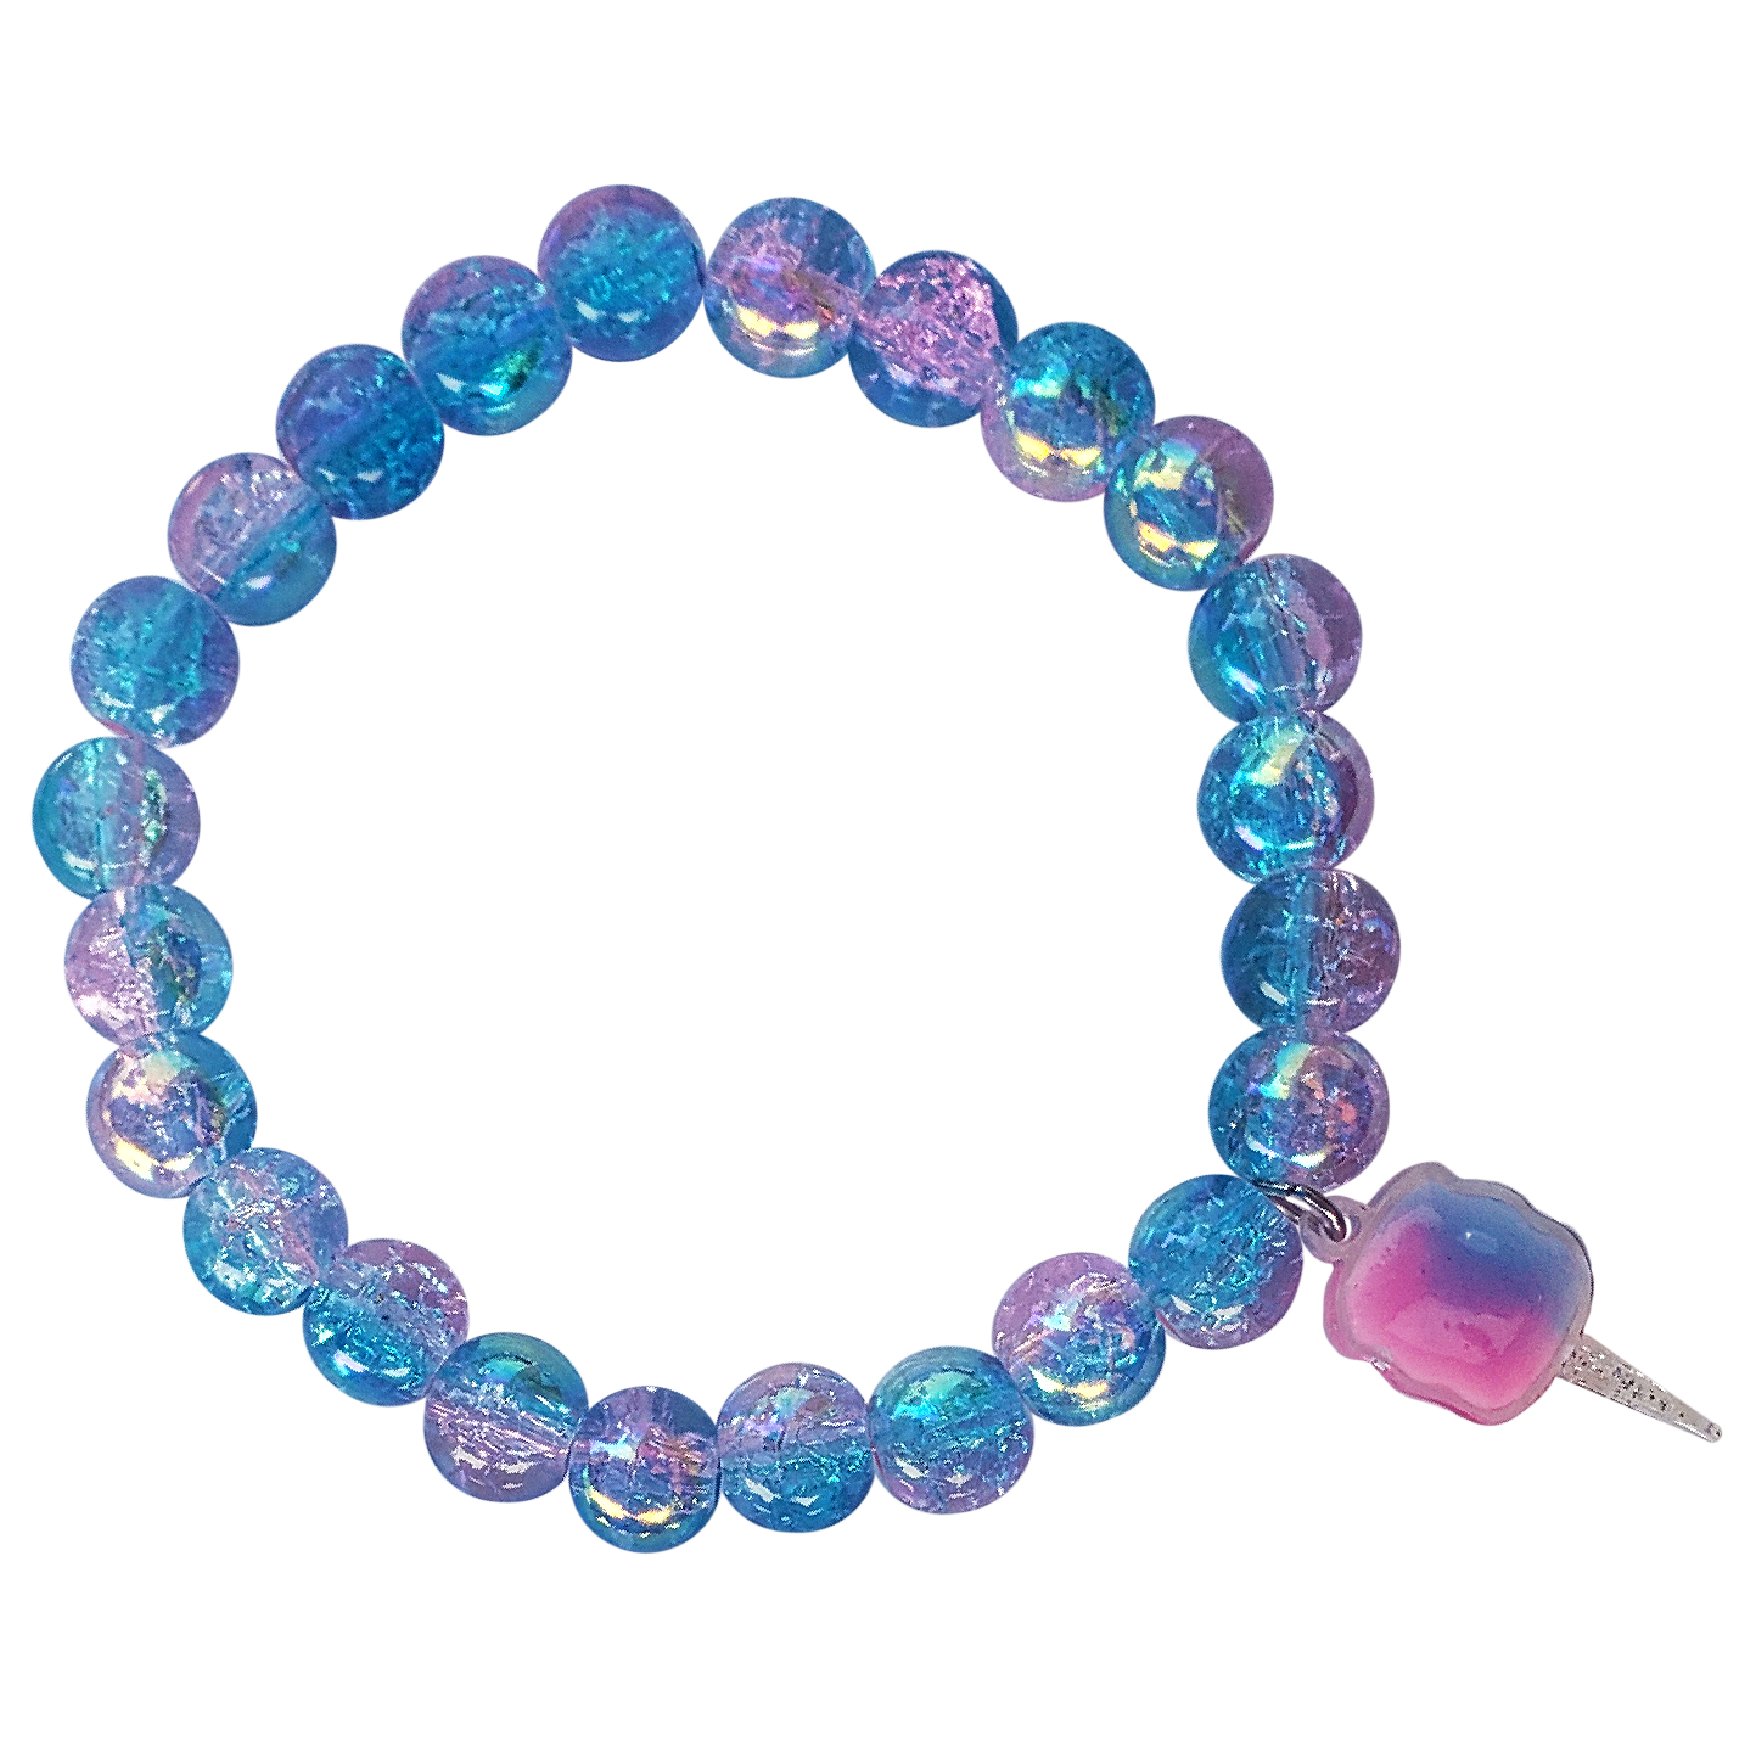 Finetoo Sweet Candy Color Ice Flower Bead Bracelet Colorful